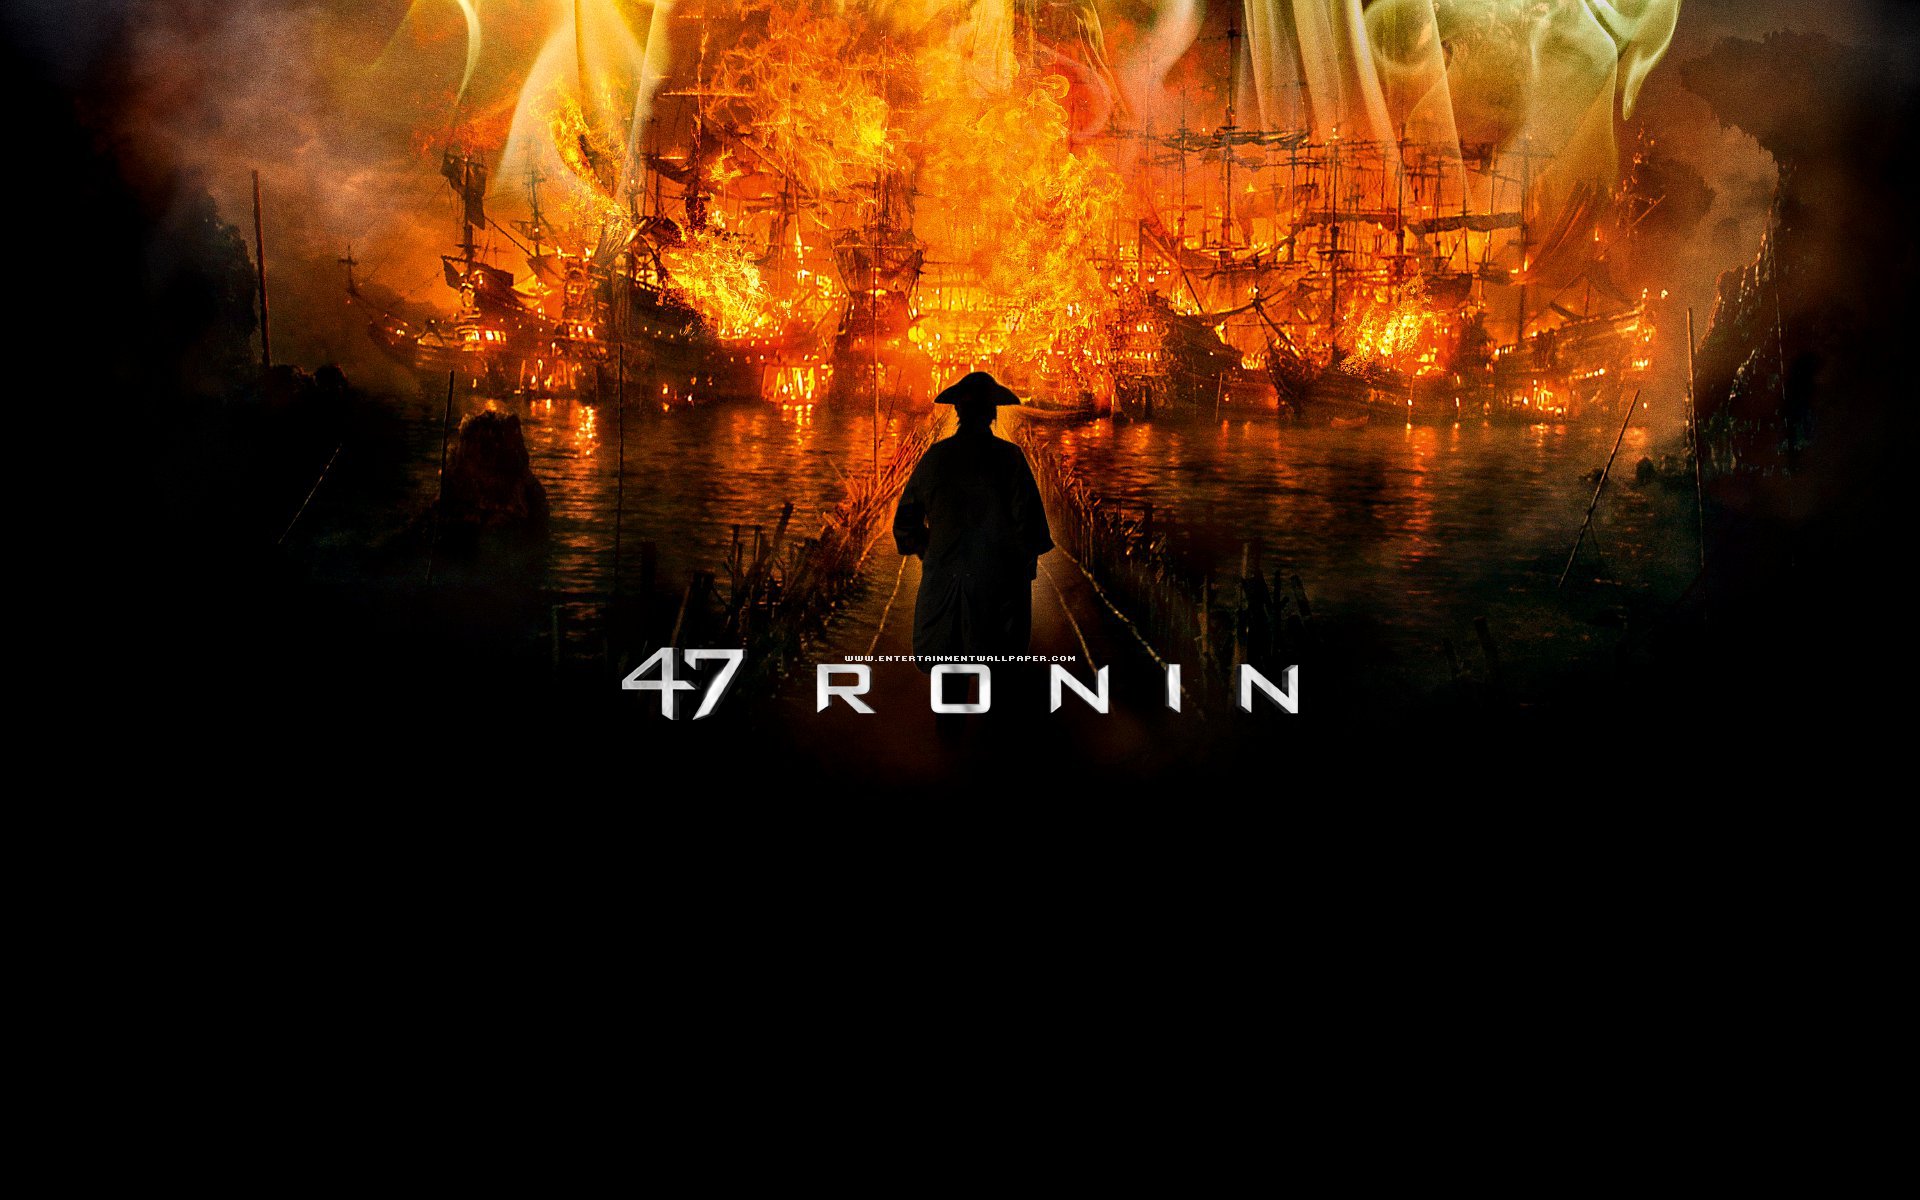 Ronin Wallpaper High Definition Quality